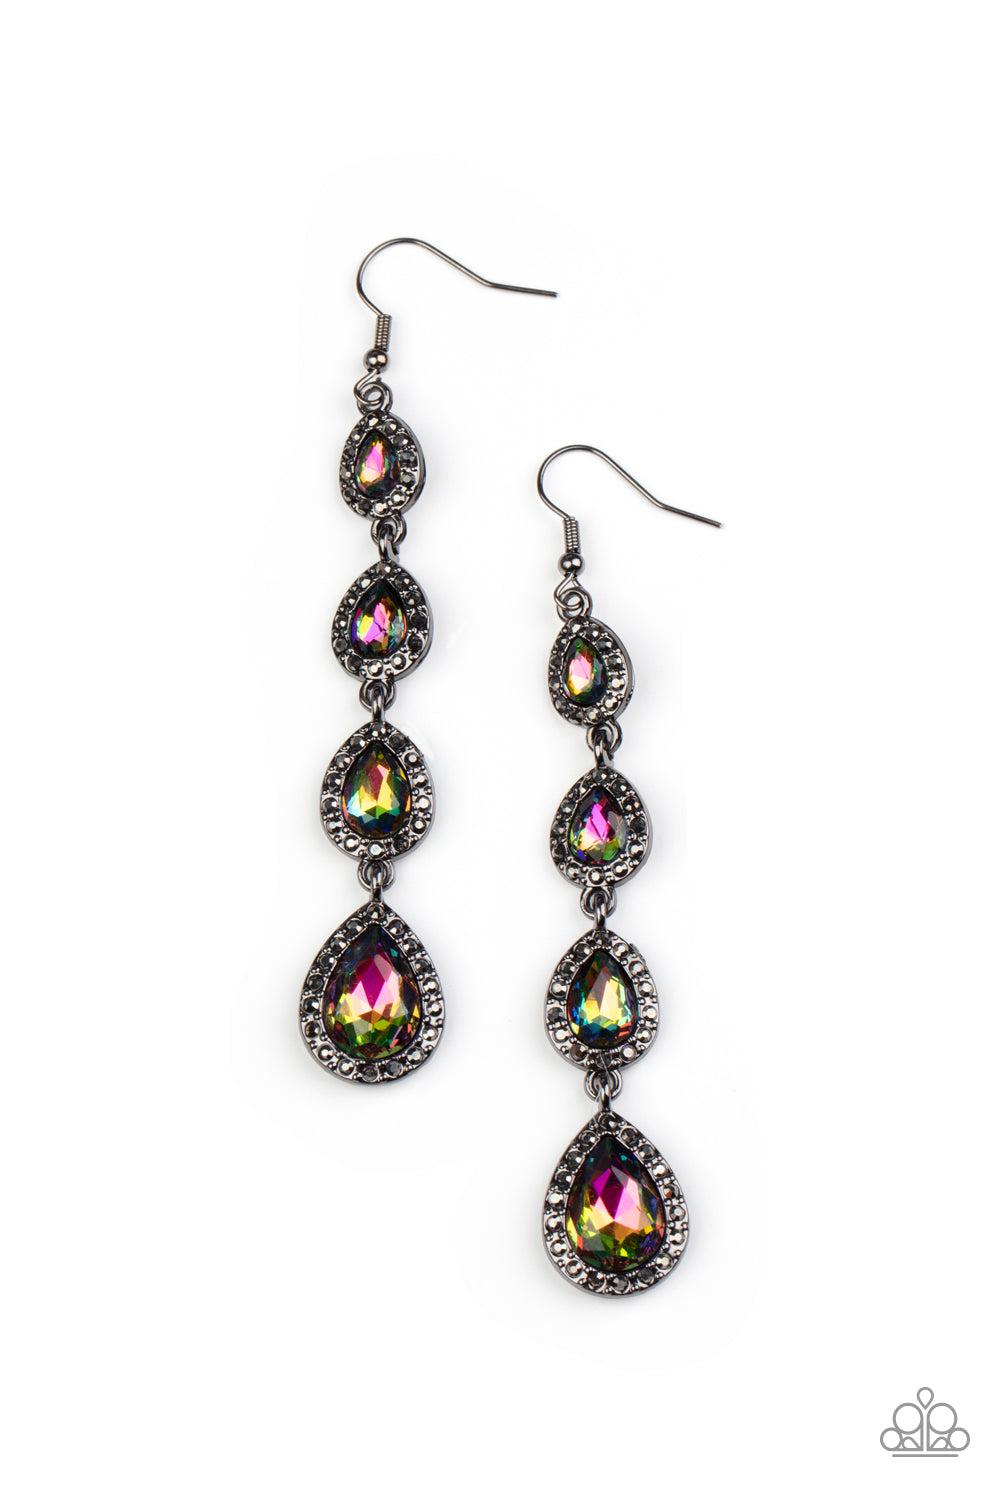 Confidently Classy Multi Oil Spill Rhinestone Earrings - Paparazzi Accessories- lightbox - CarasShop.com - $5 Jewelry by Cara Jewels